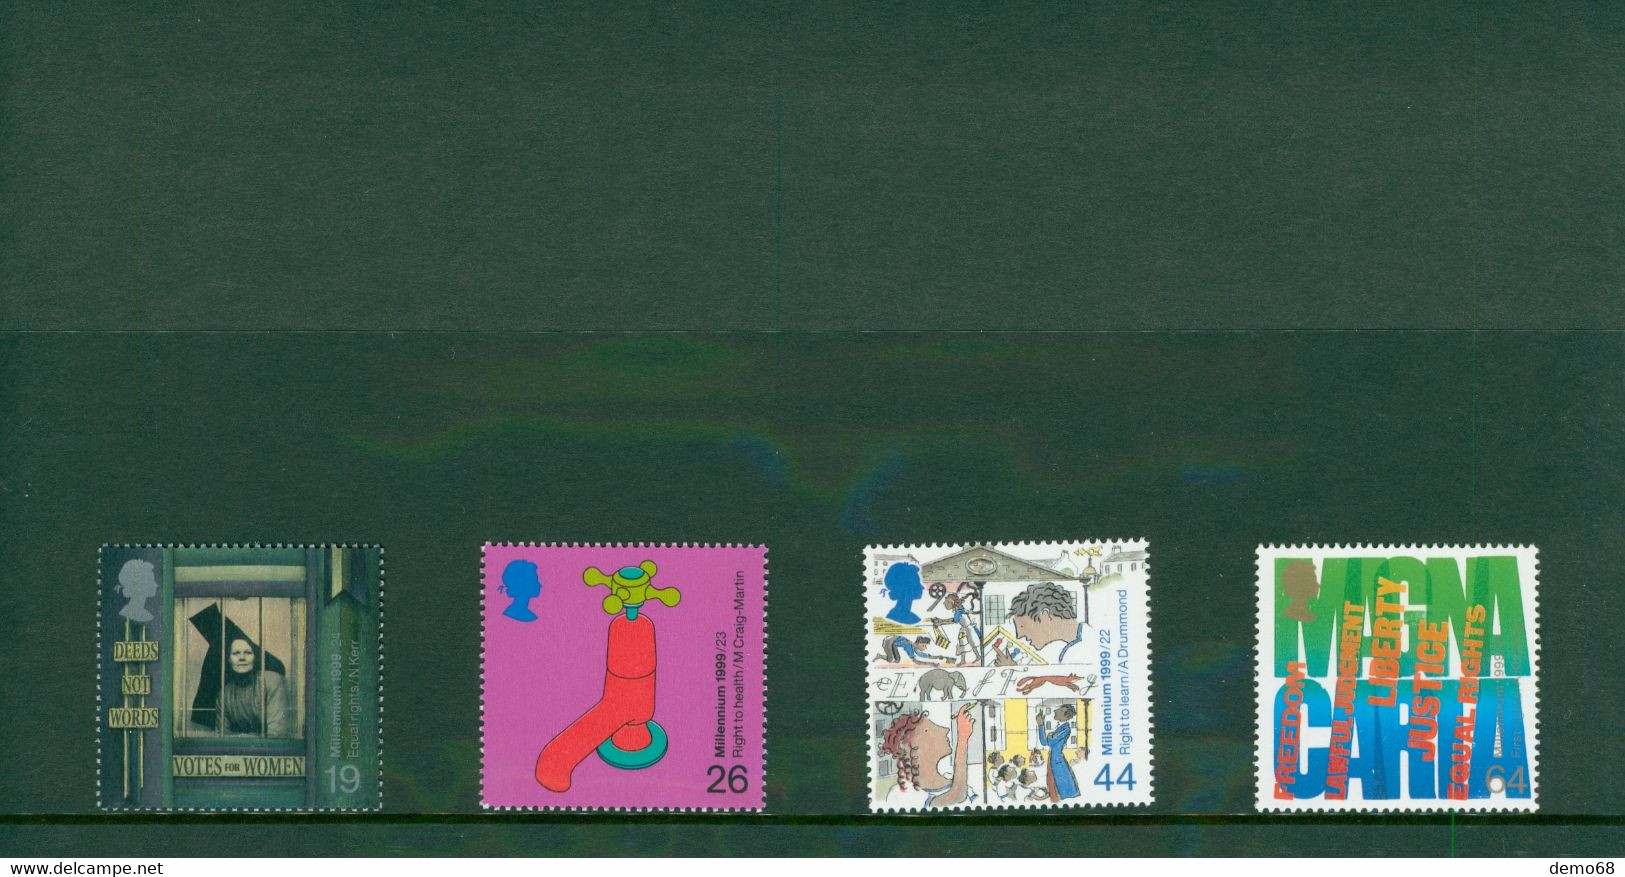 Stamp Timbre England Great Britain British Citizens' Tale Not Vote NoVoceFeuillet Neuf 4 Timbre S Royal Mail Mint Stamps - Sammlungen